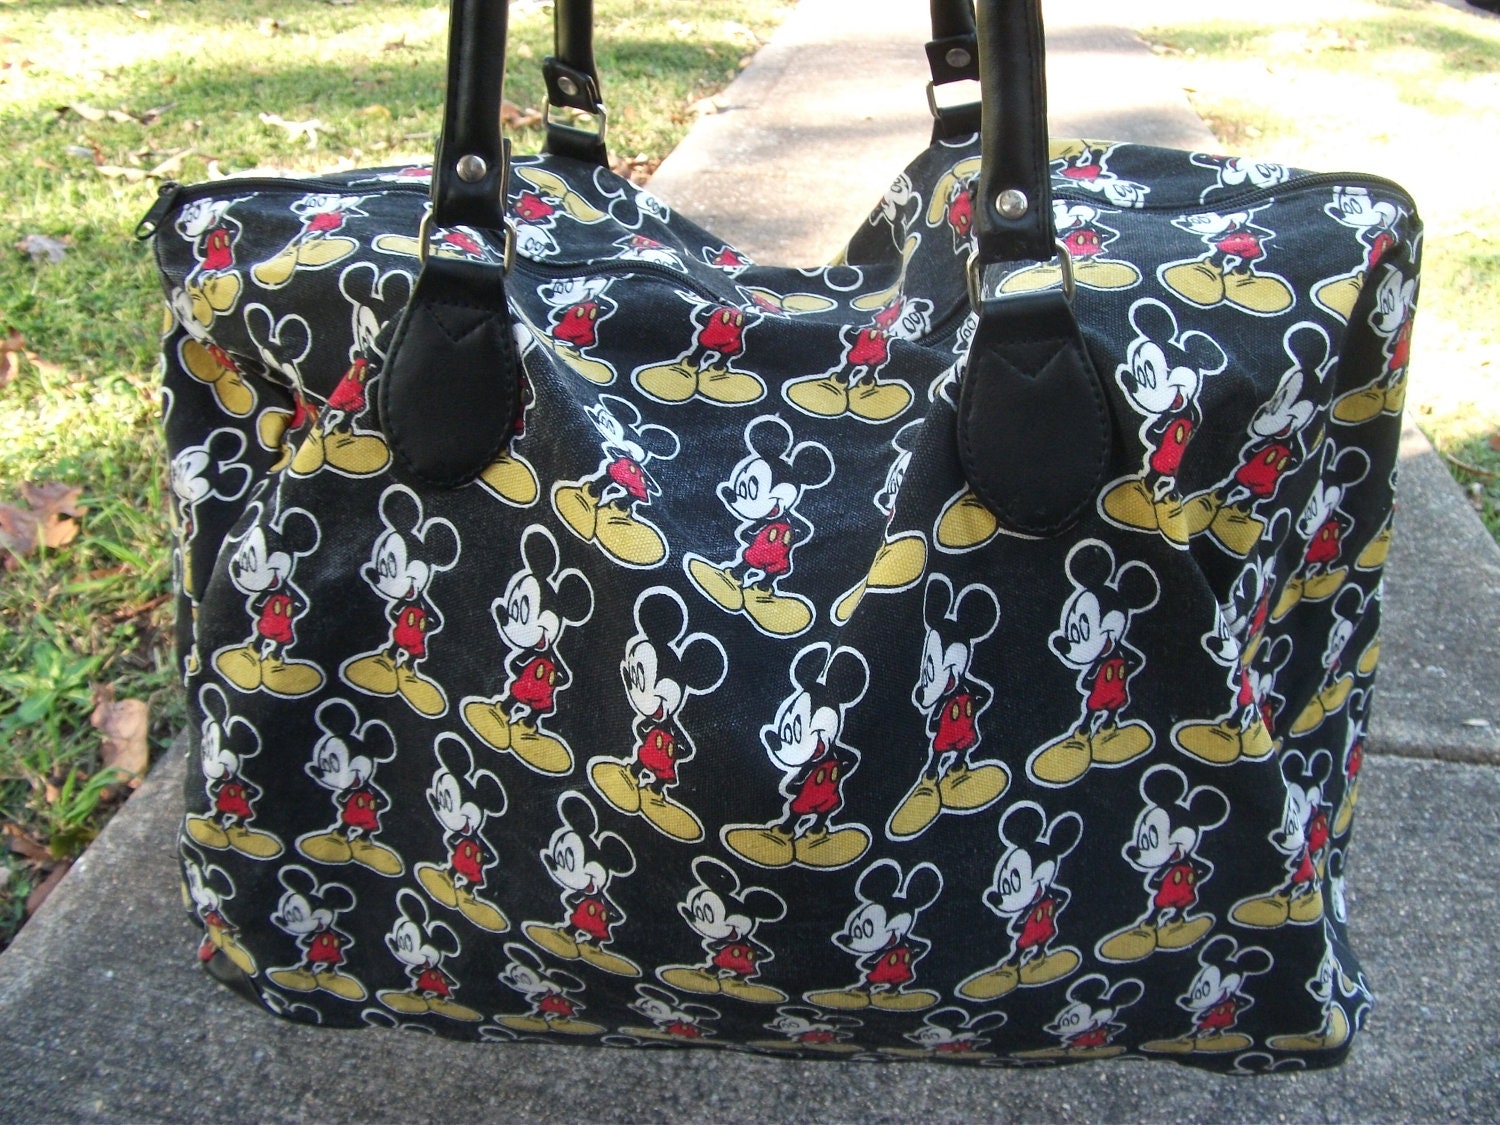 Mickey Mouse Unlimted Vintage Tote Bag. Overnite Big Tote